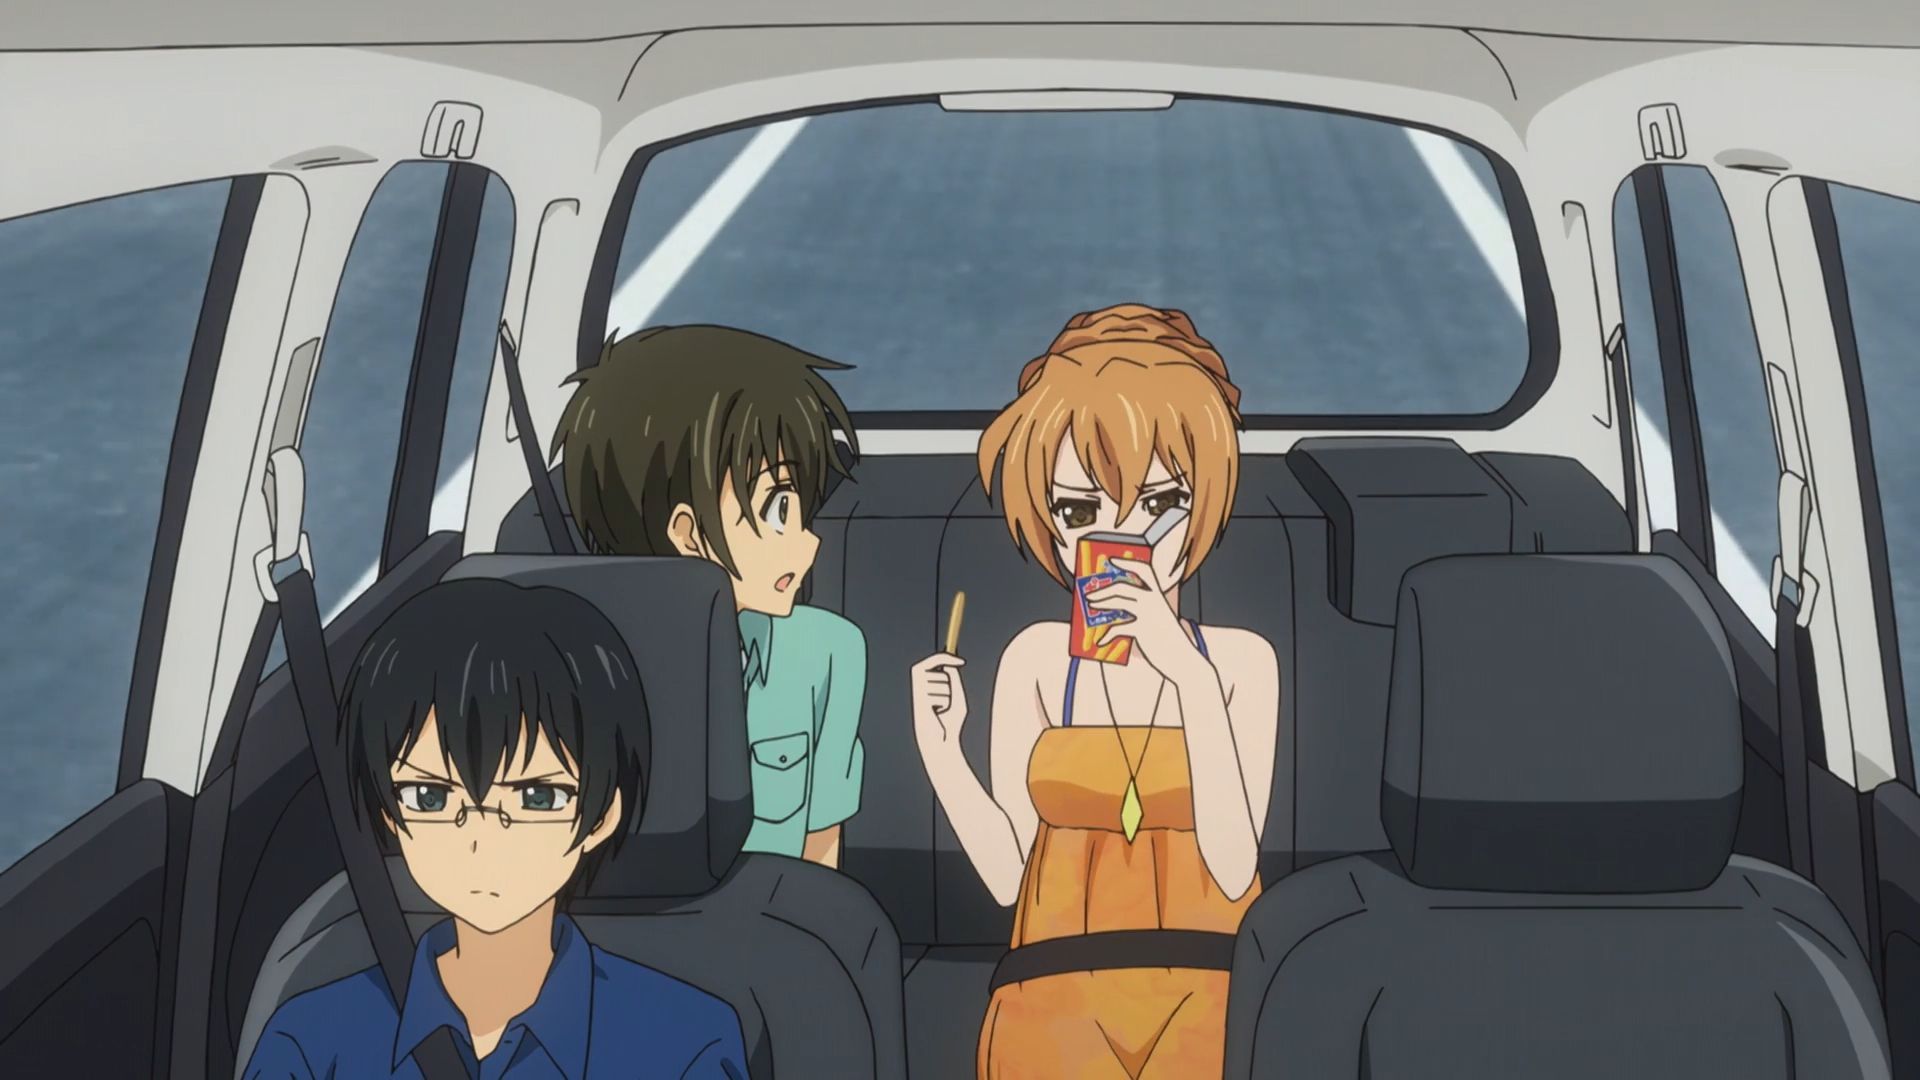 Golden Time ゴールデンタイム Episode 15 Review: A Day At The Beach 